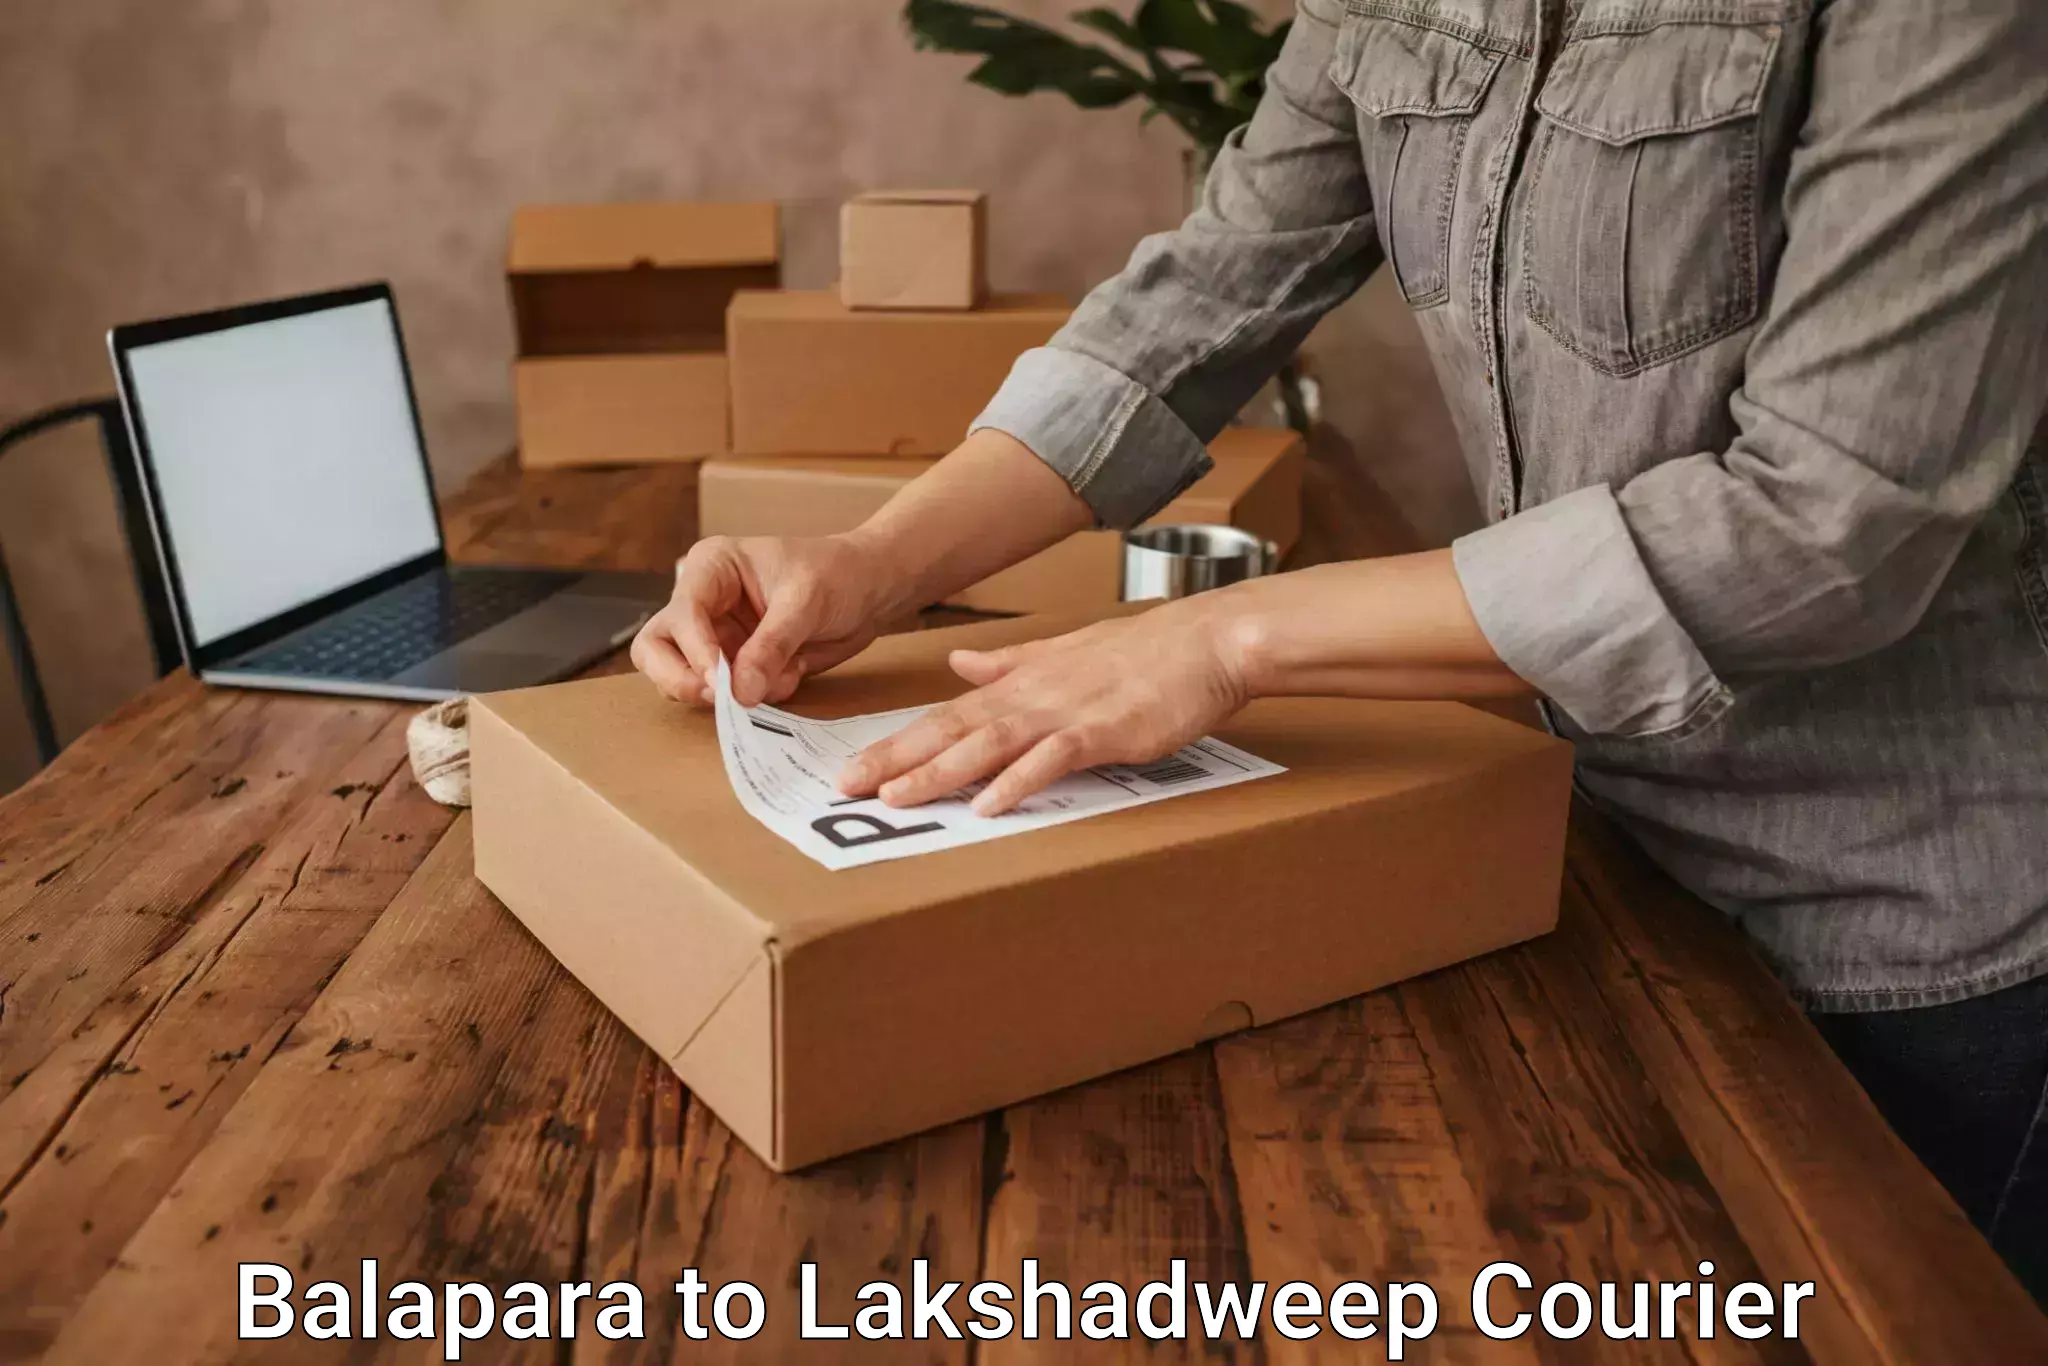 Supply chain delivery in Balapara to Lakshadweep